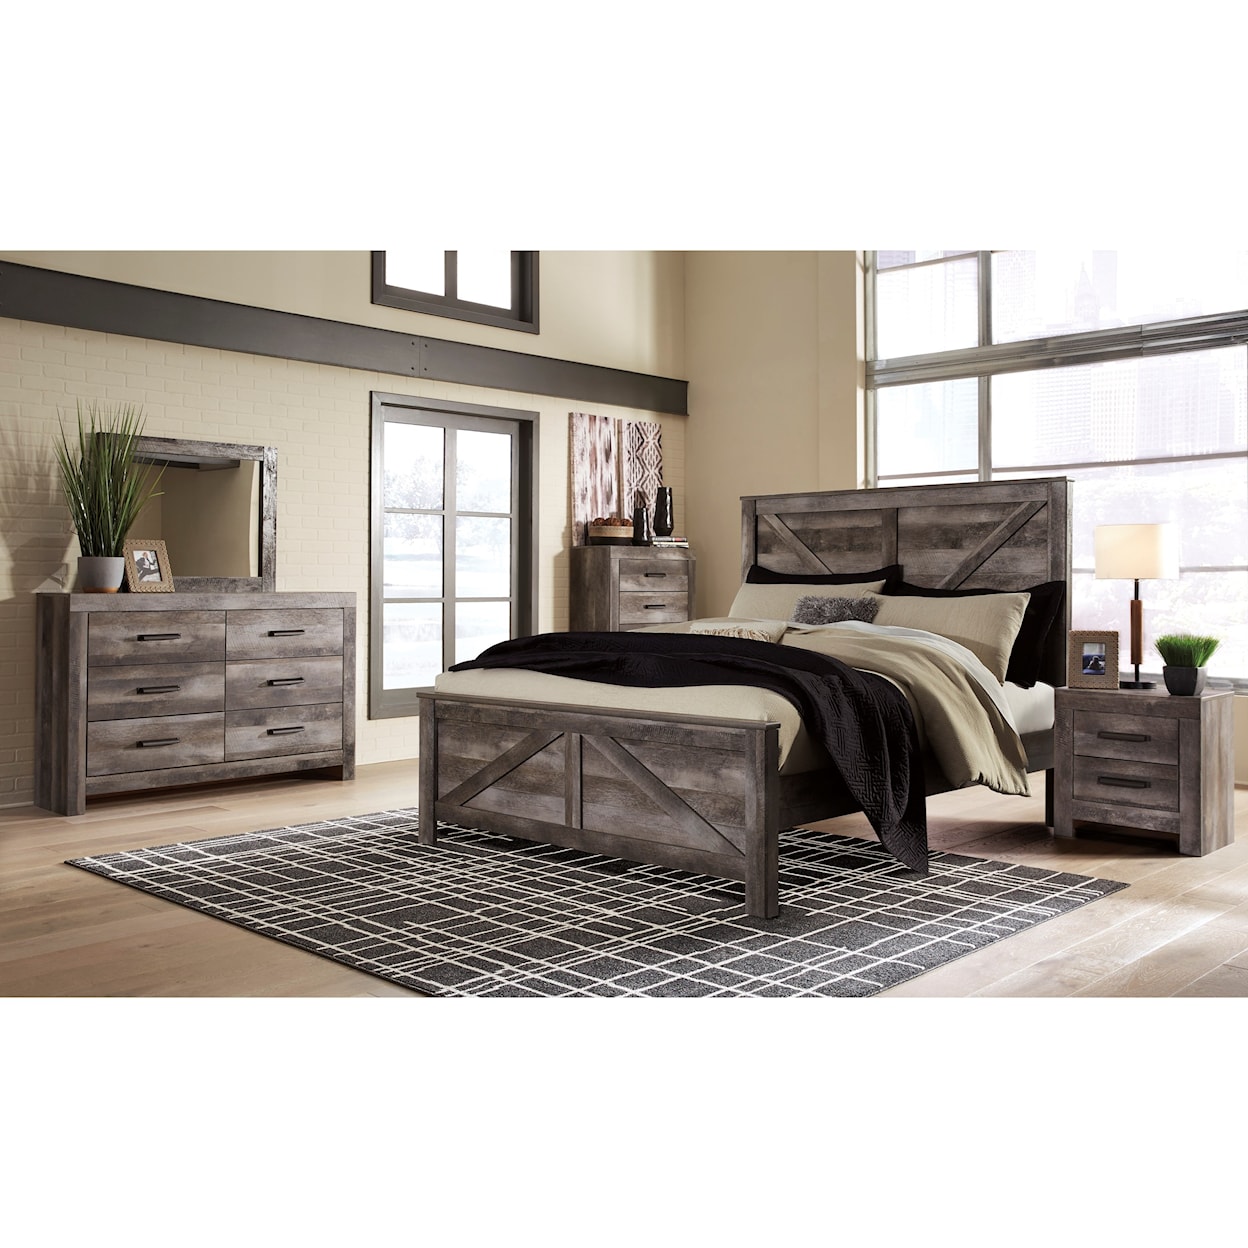 Signature Design by Ashley Wynnlow 6PC QUEEN BEDROOM GROUP